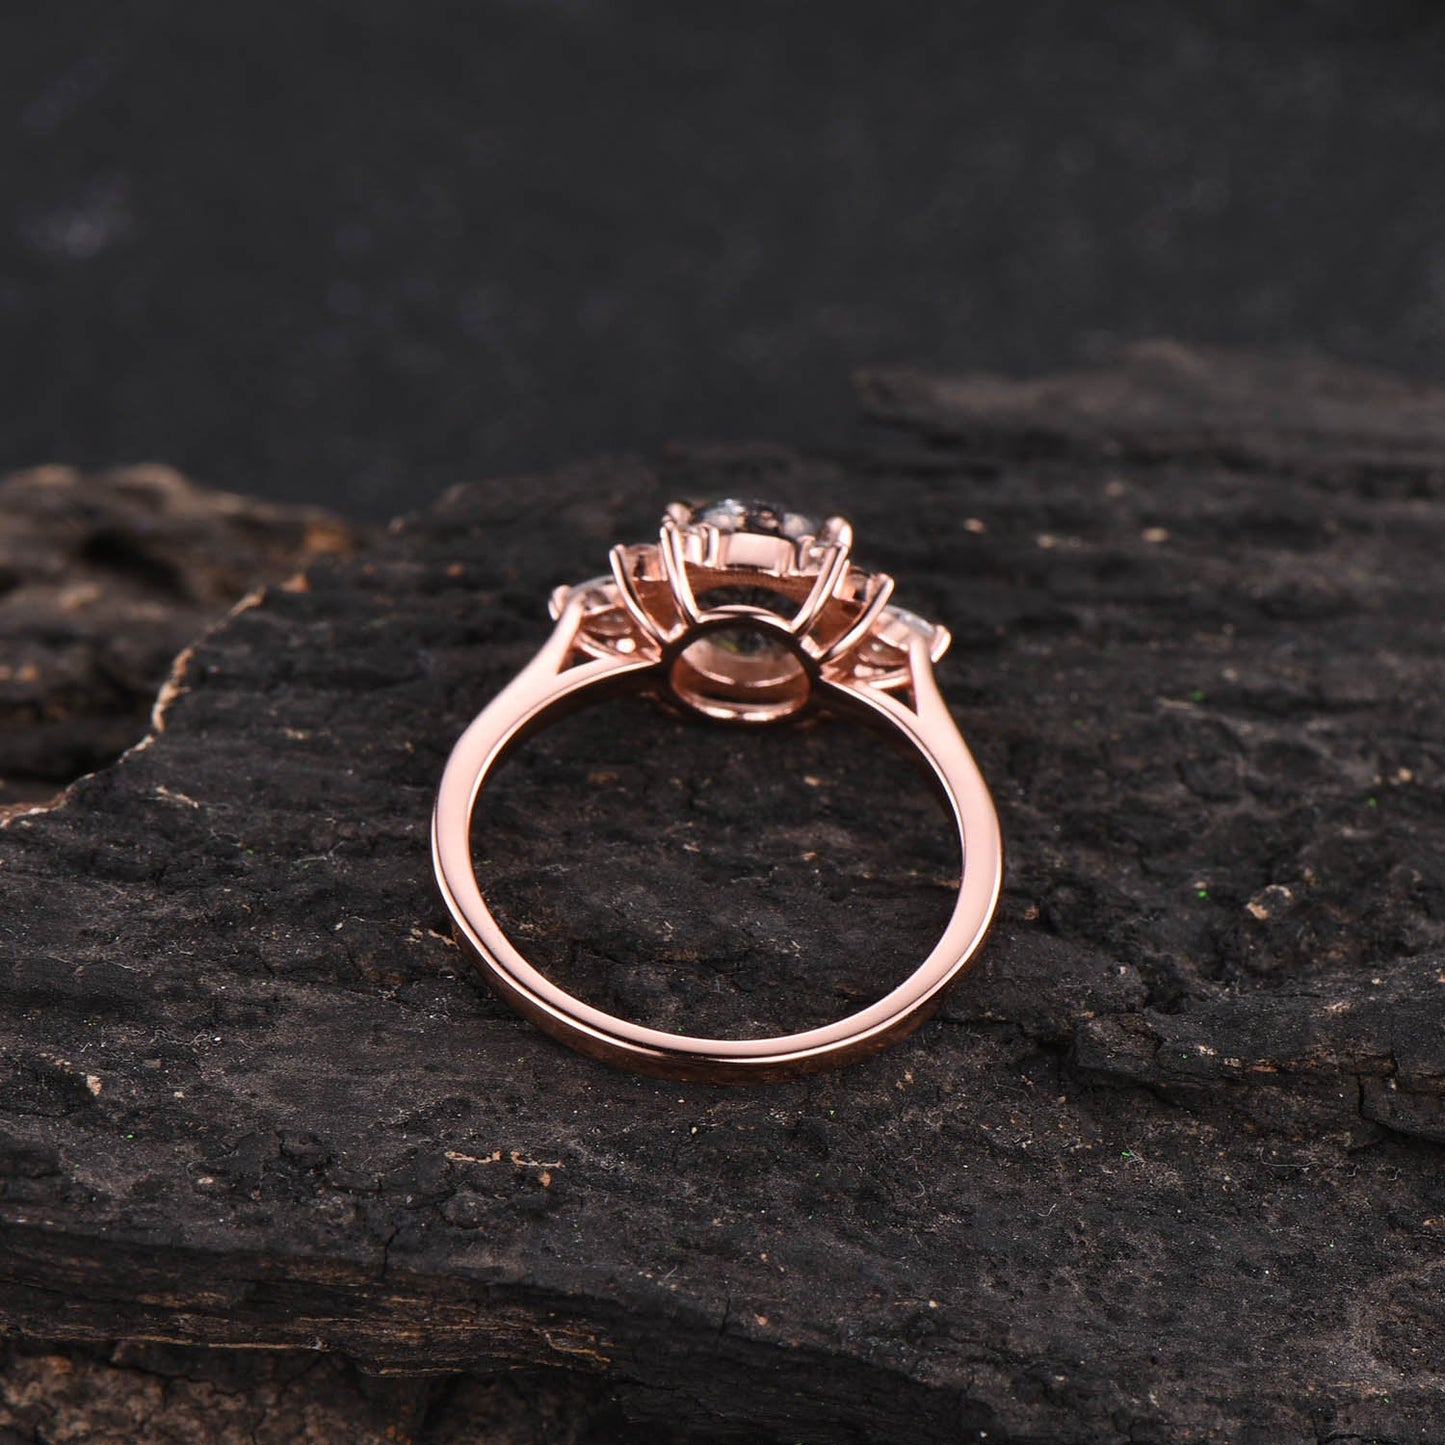 Vintage moss agate engagement ring rose gold ring cluster moissanite ring for women unique moss agate ring gold antique jewelry bridal gift